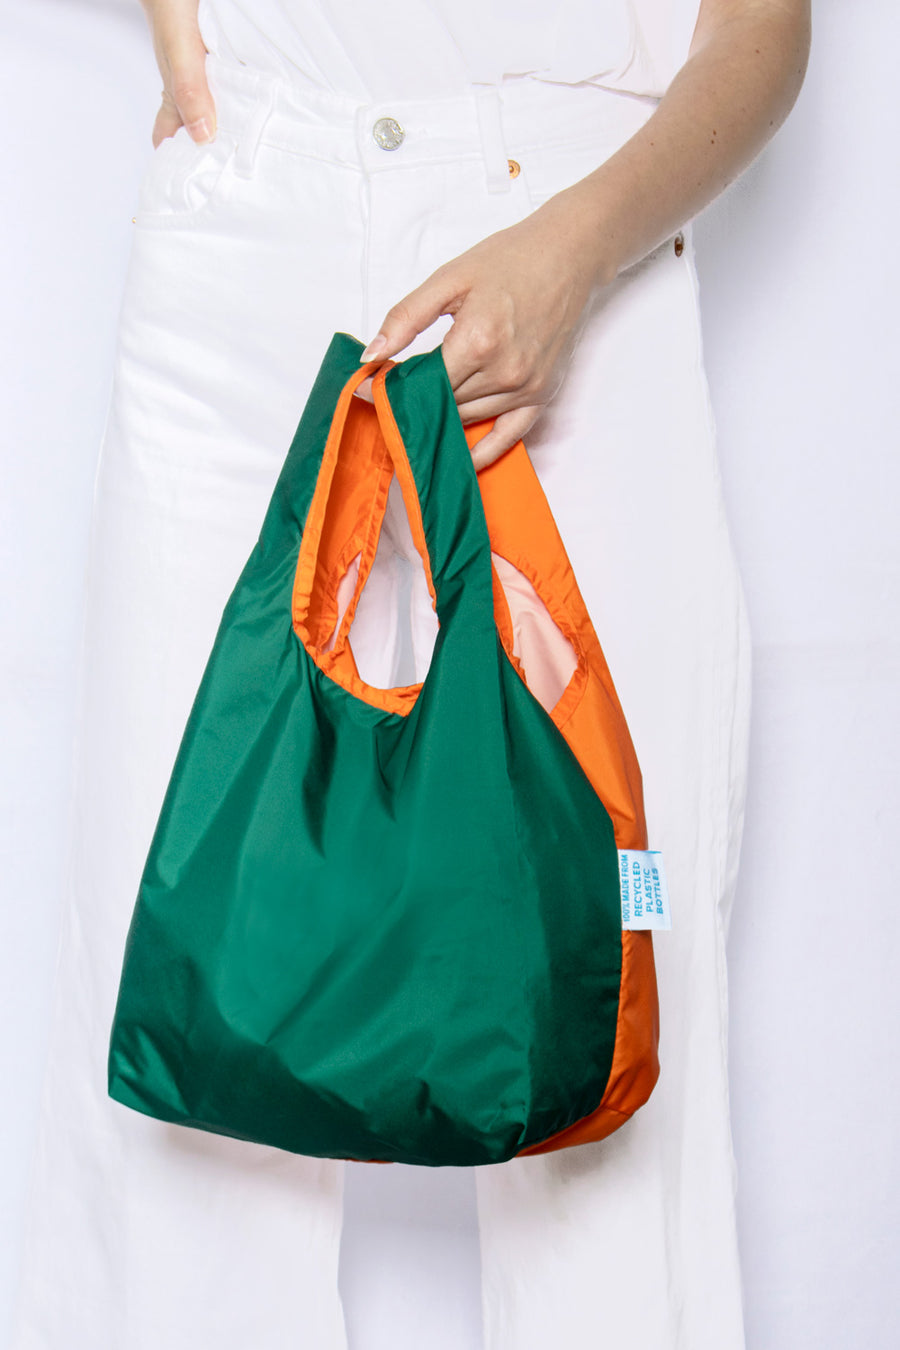 Orange & Green Mini - 100% recycled reusable bag by Kind Bag in Happy Zero  Waste